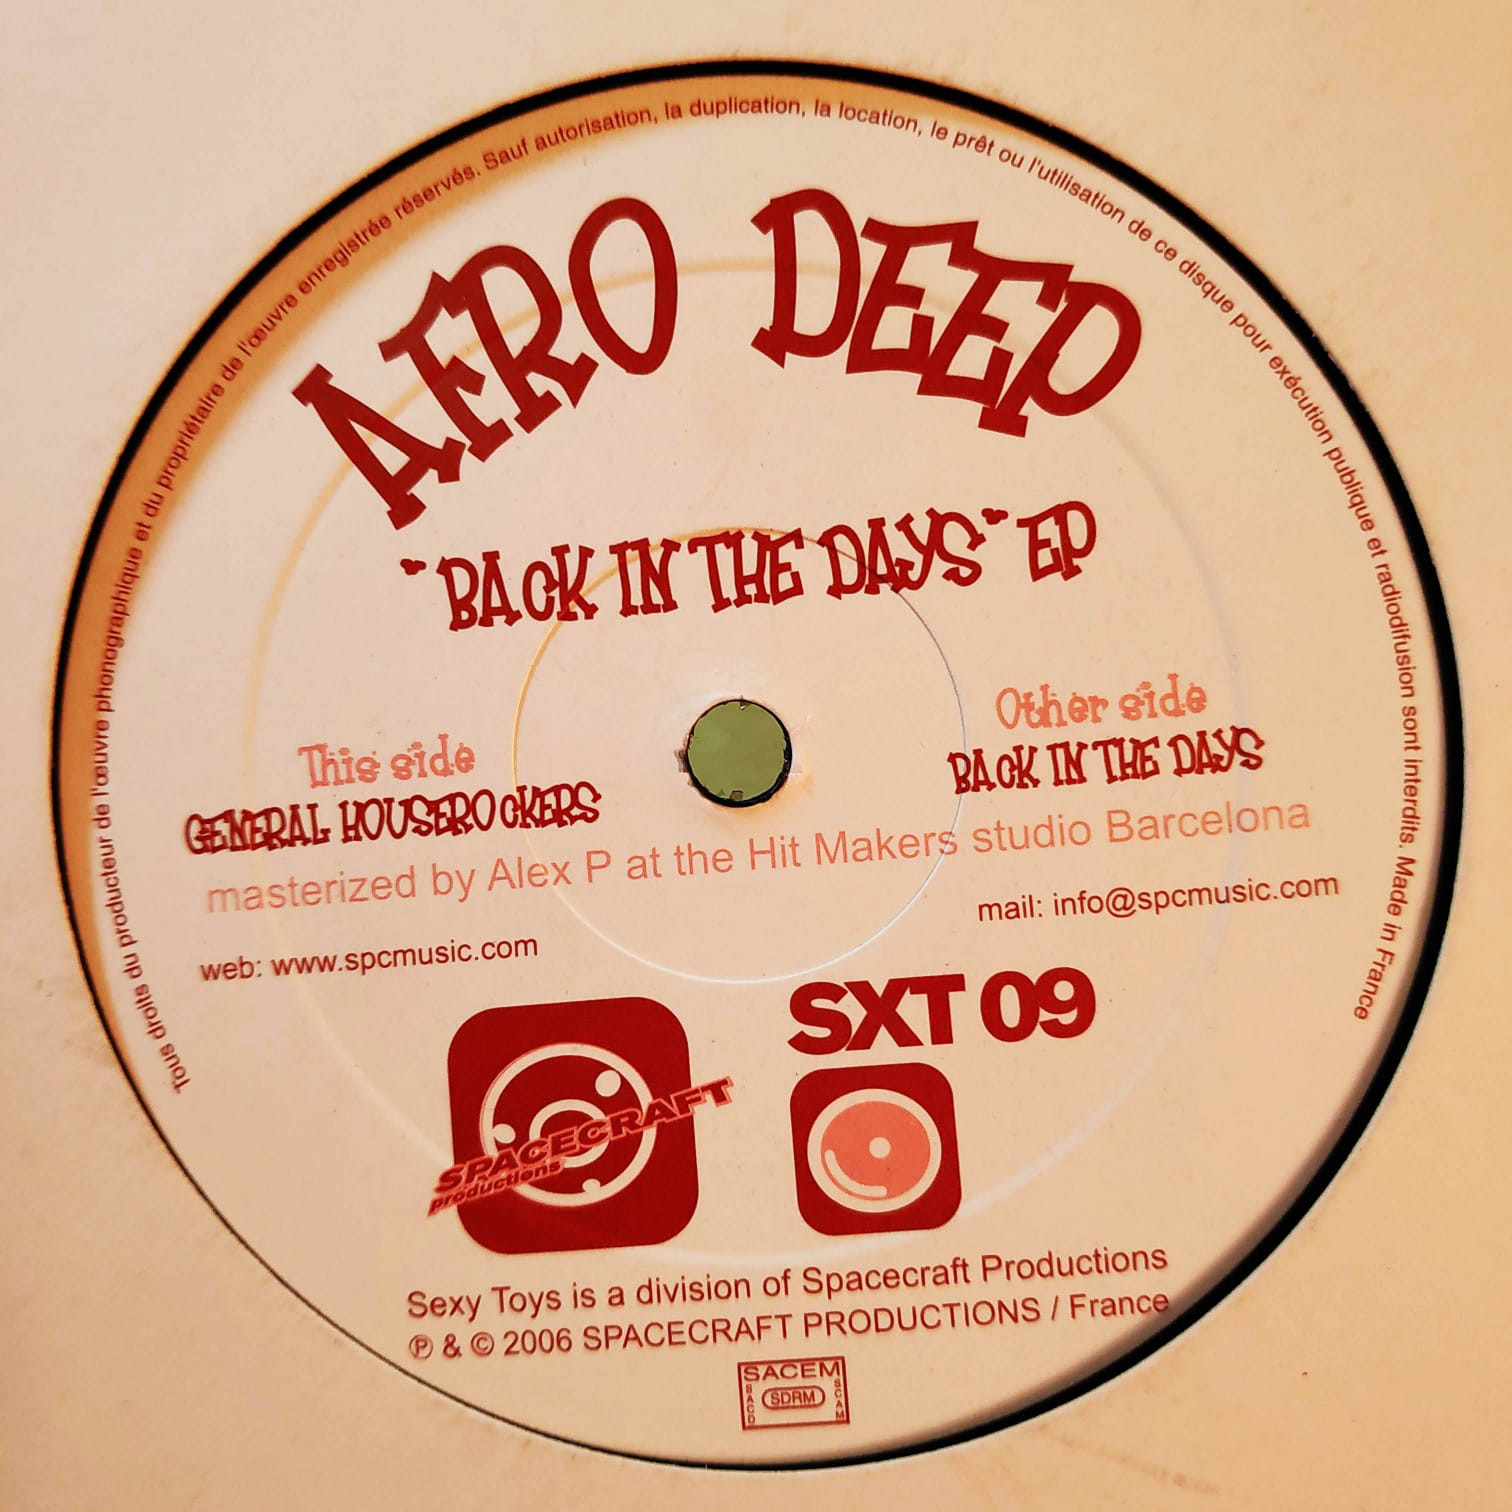 (28348) Afro Deep ‎– Back In The Days EP